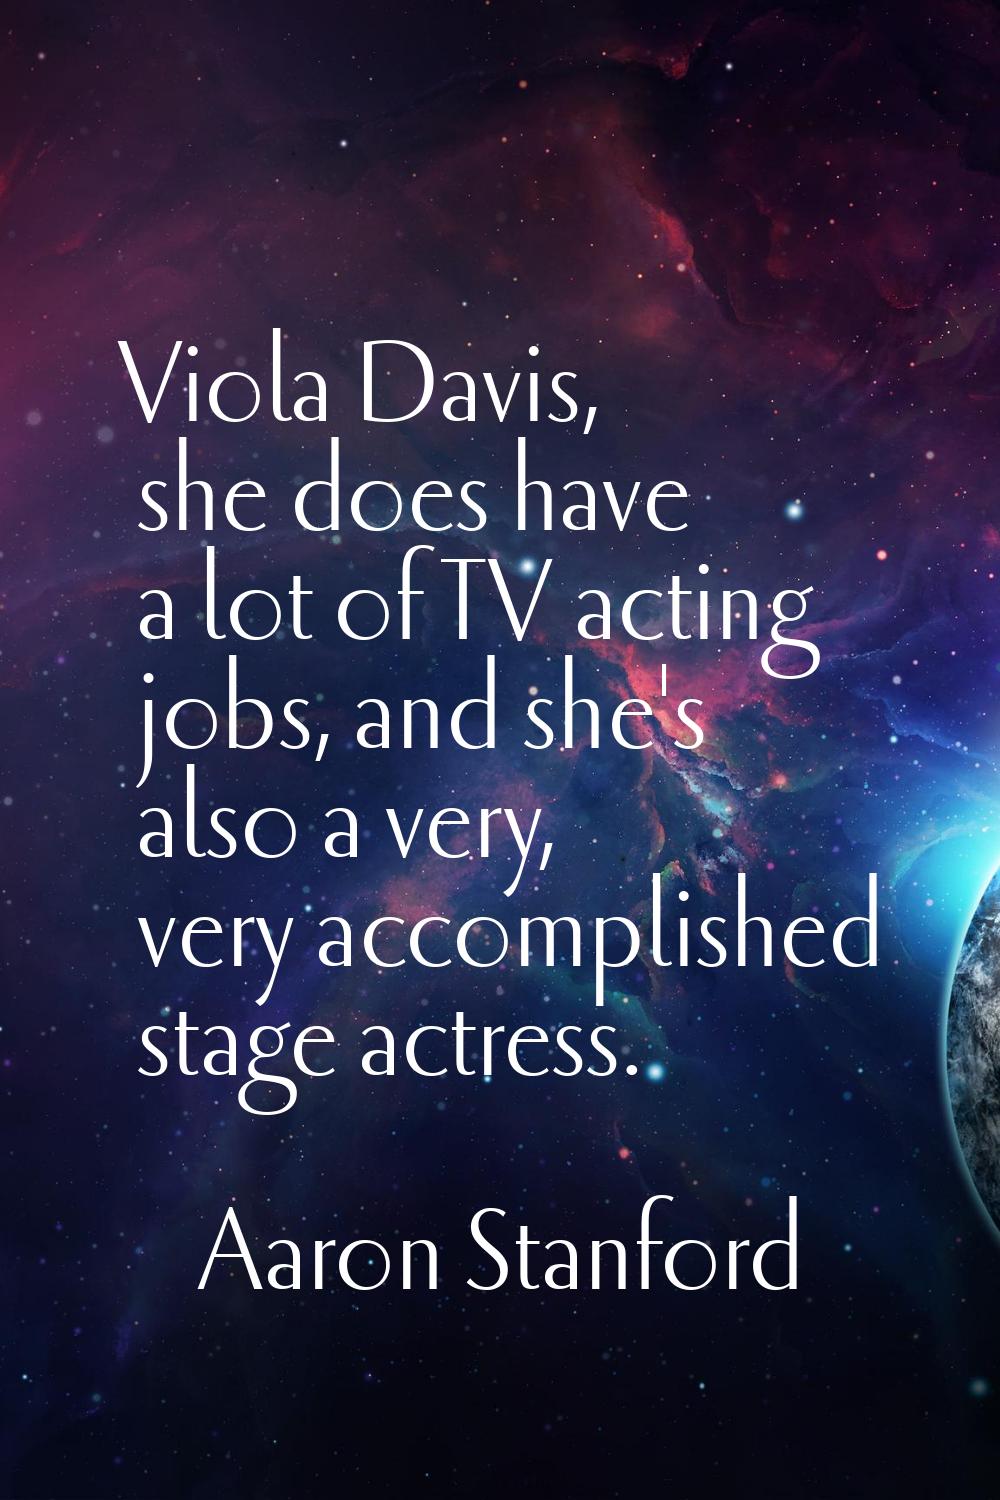 Viola Davis, she does have a lot of TV acting jobs, and she's also a very, very accomplished stage 